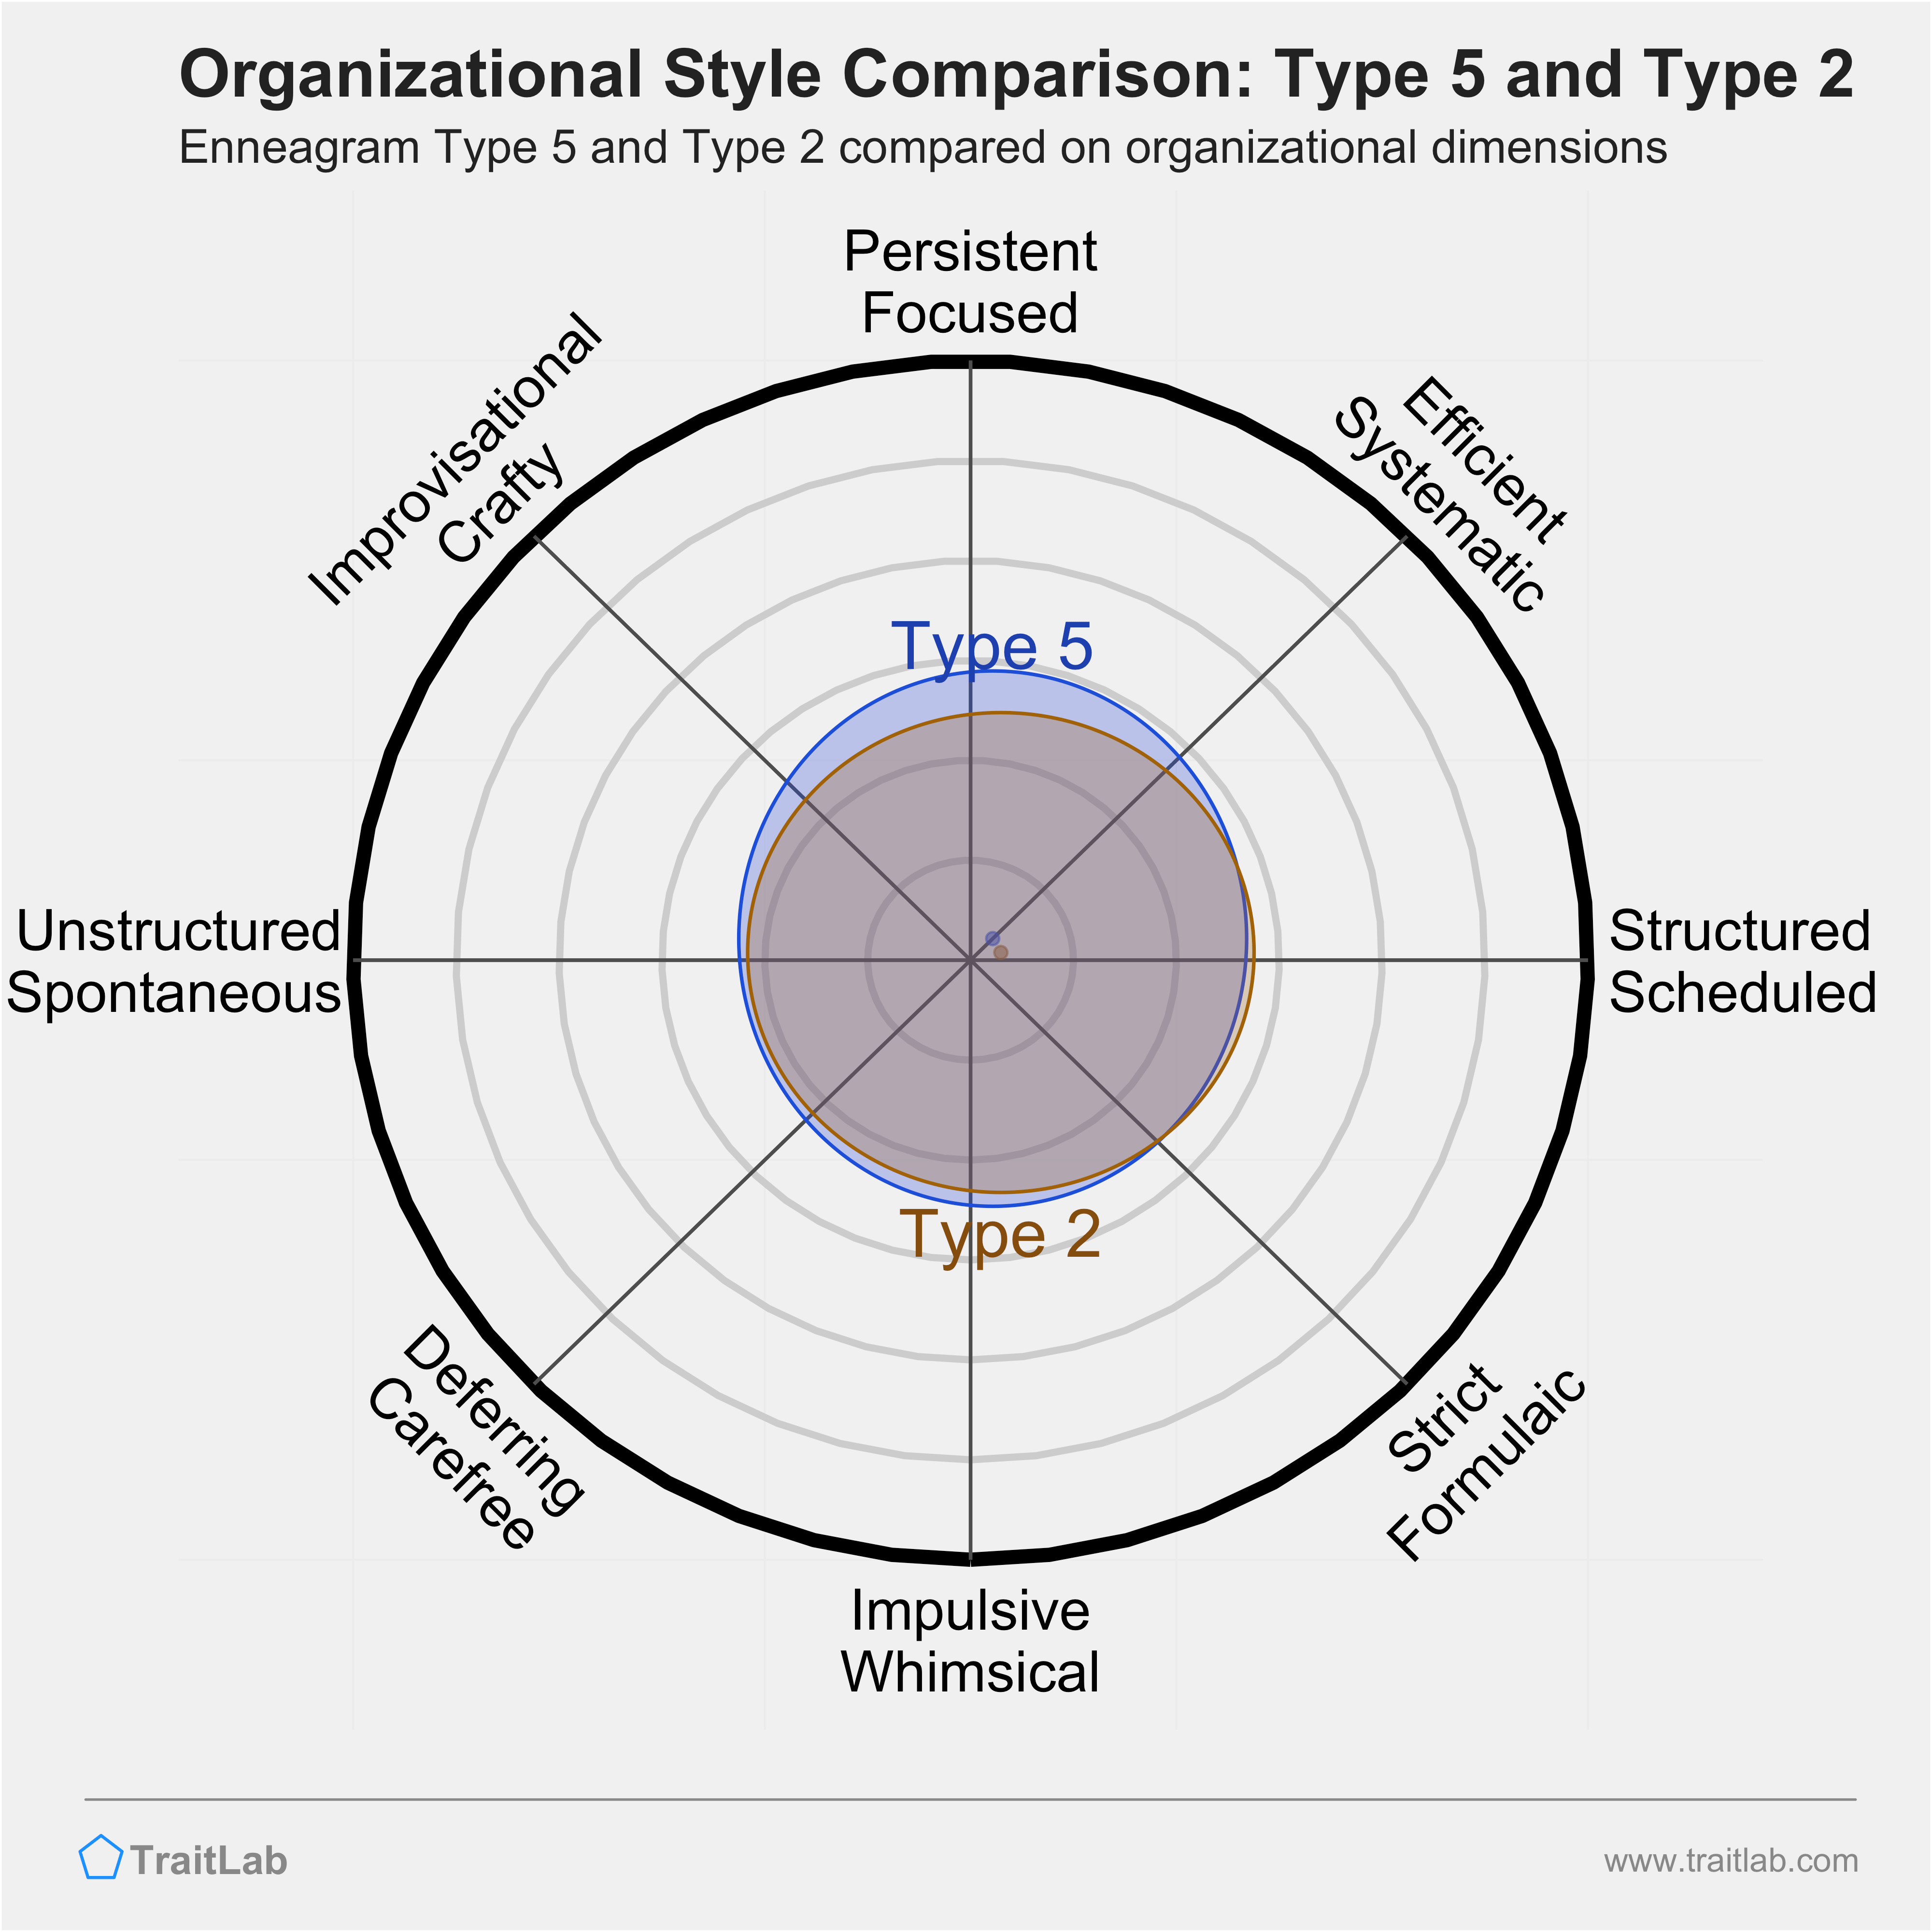 Type 5 and Type 2 comparison across organizational dimensions